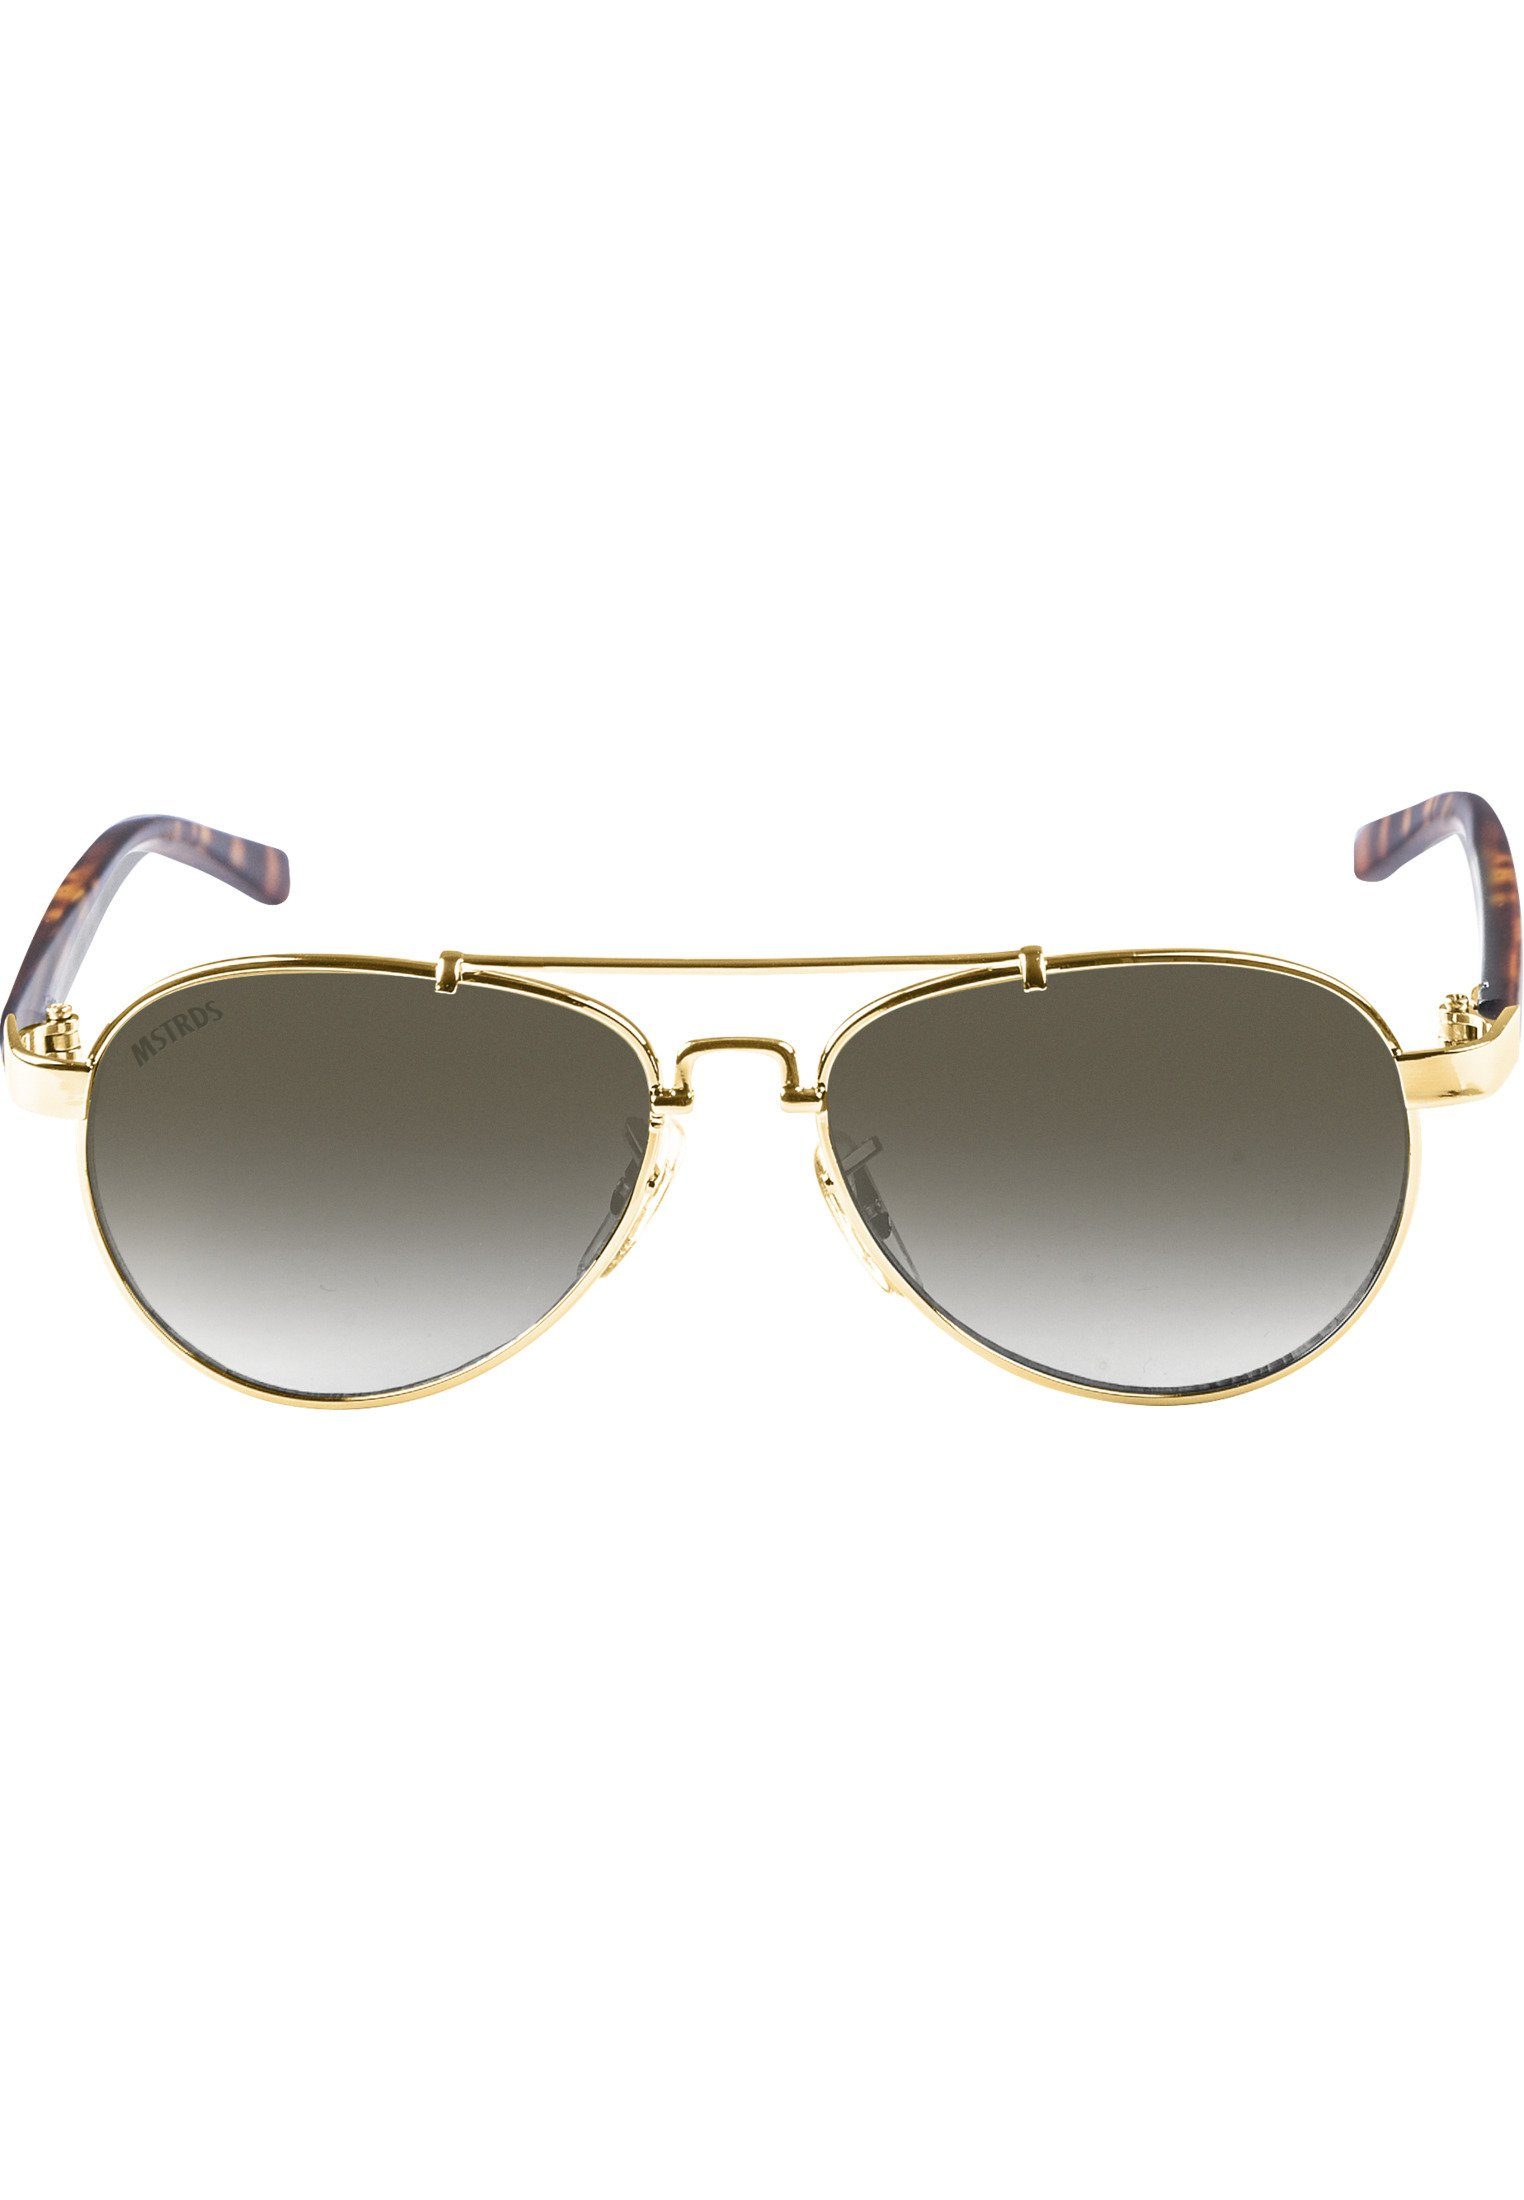 MSTRDS Sonnenbrille Accessoires Mumbo Youth gold/brown